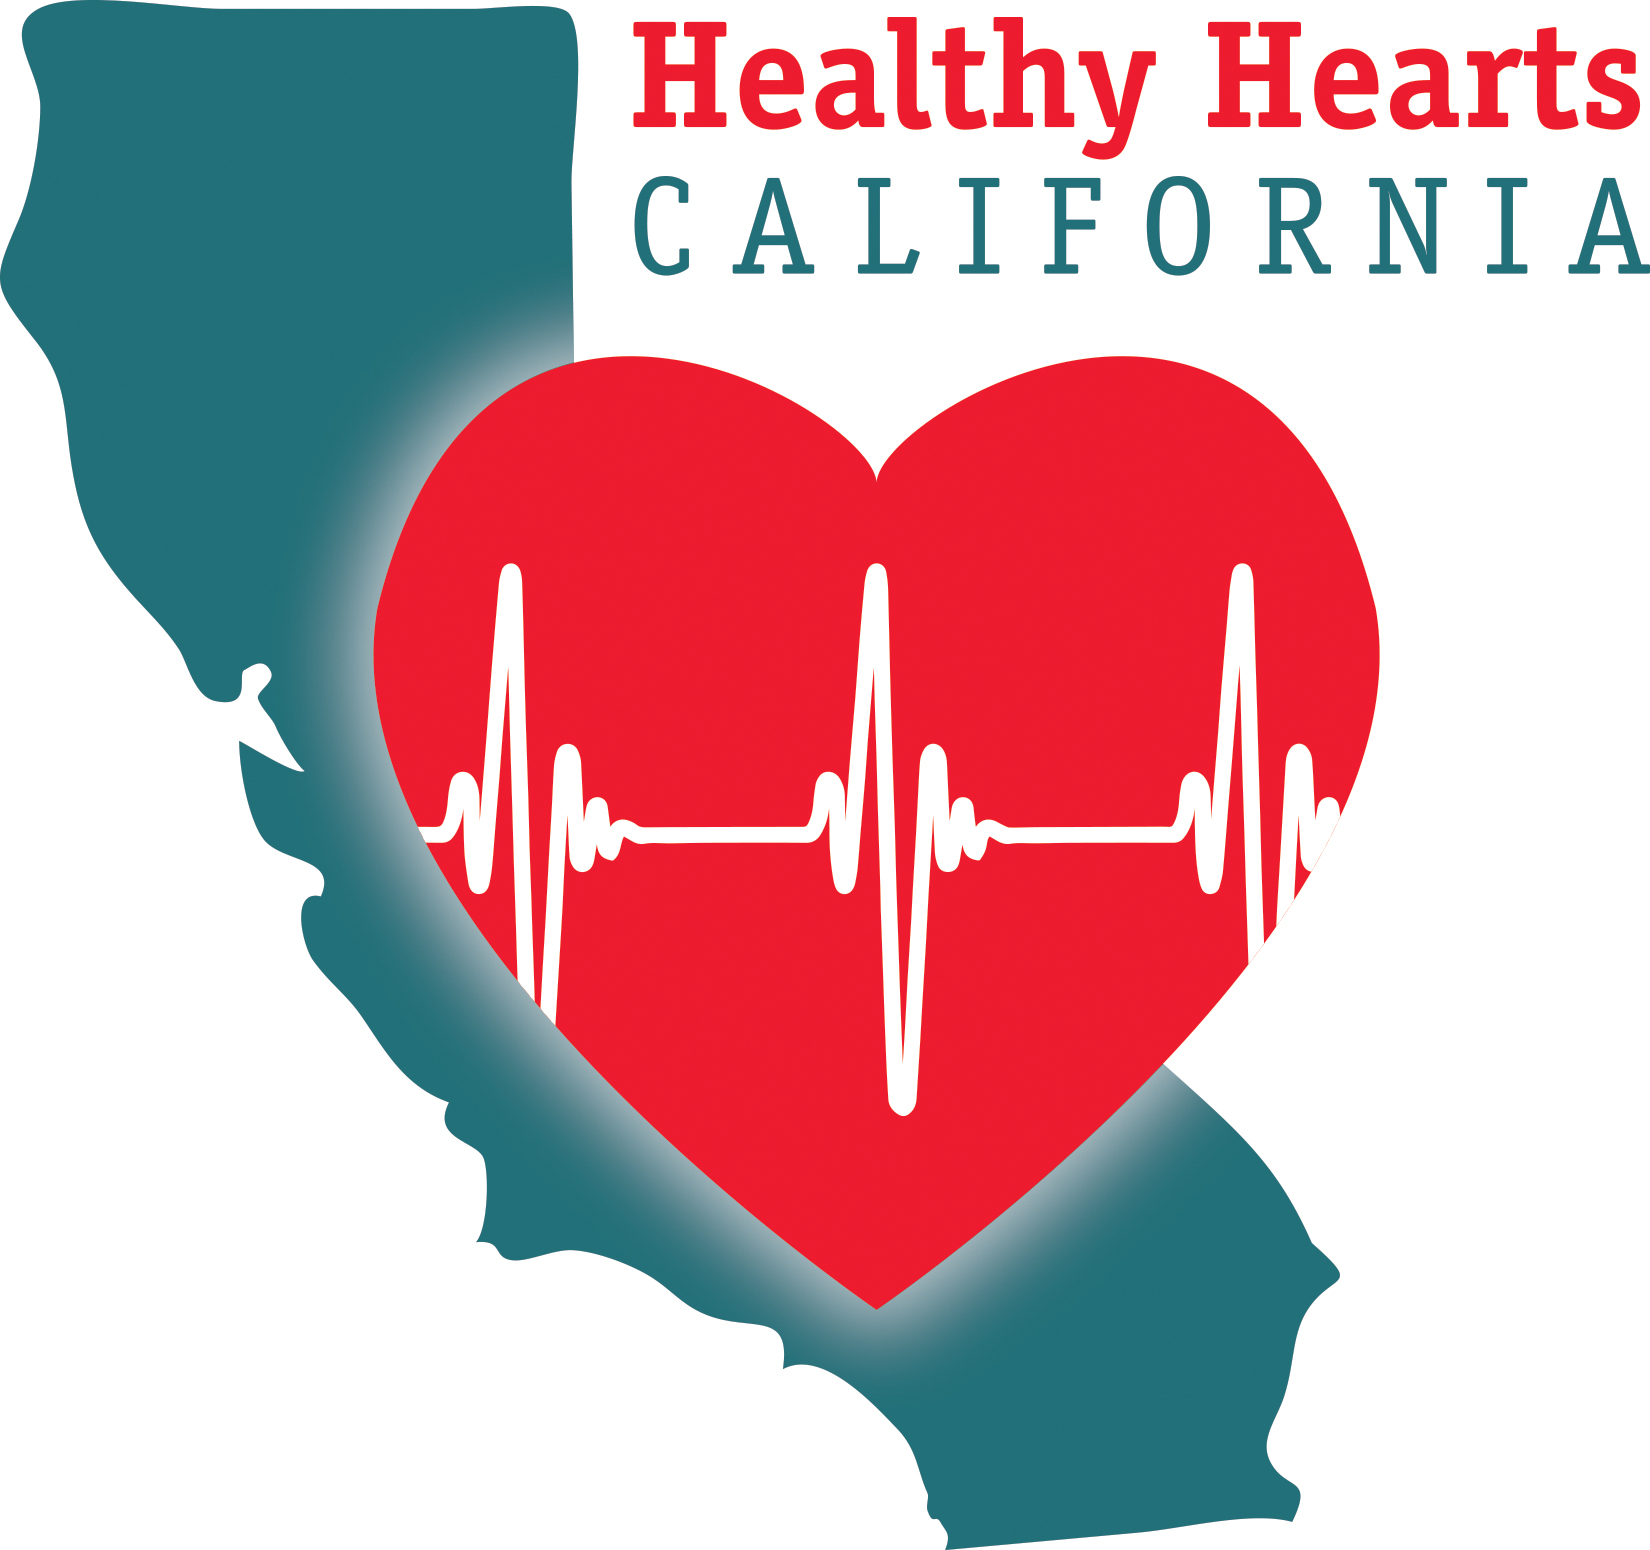 Healthy Hearts California Logo: California State Geographic Image with Heart